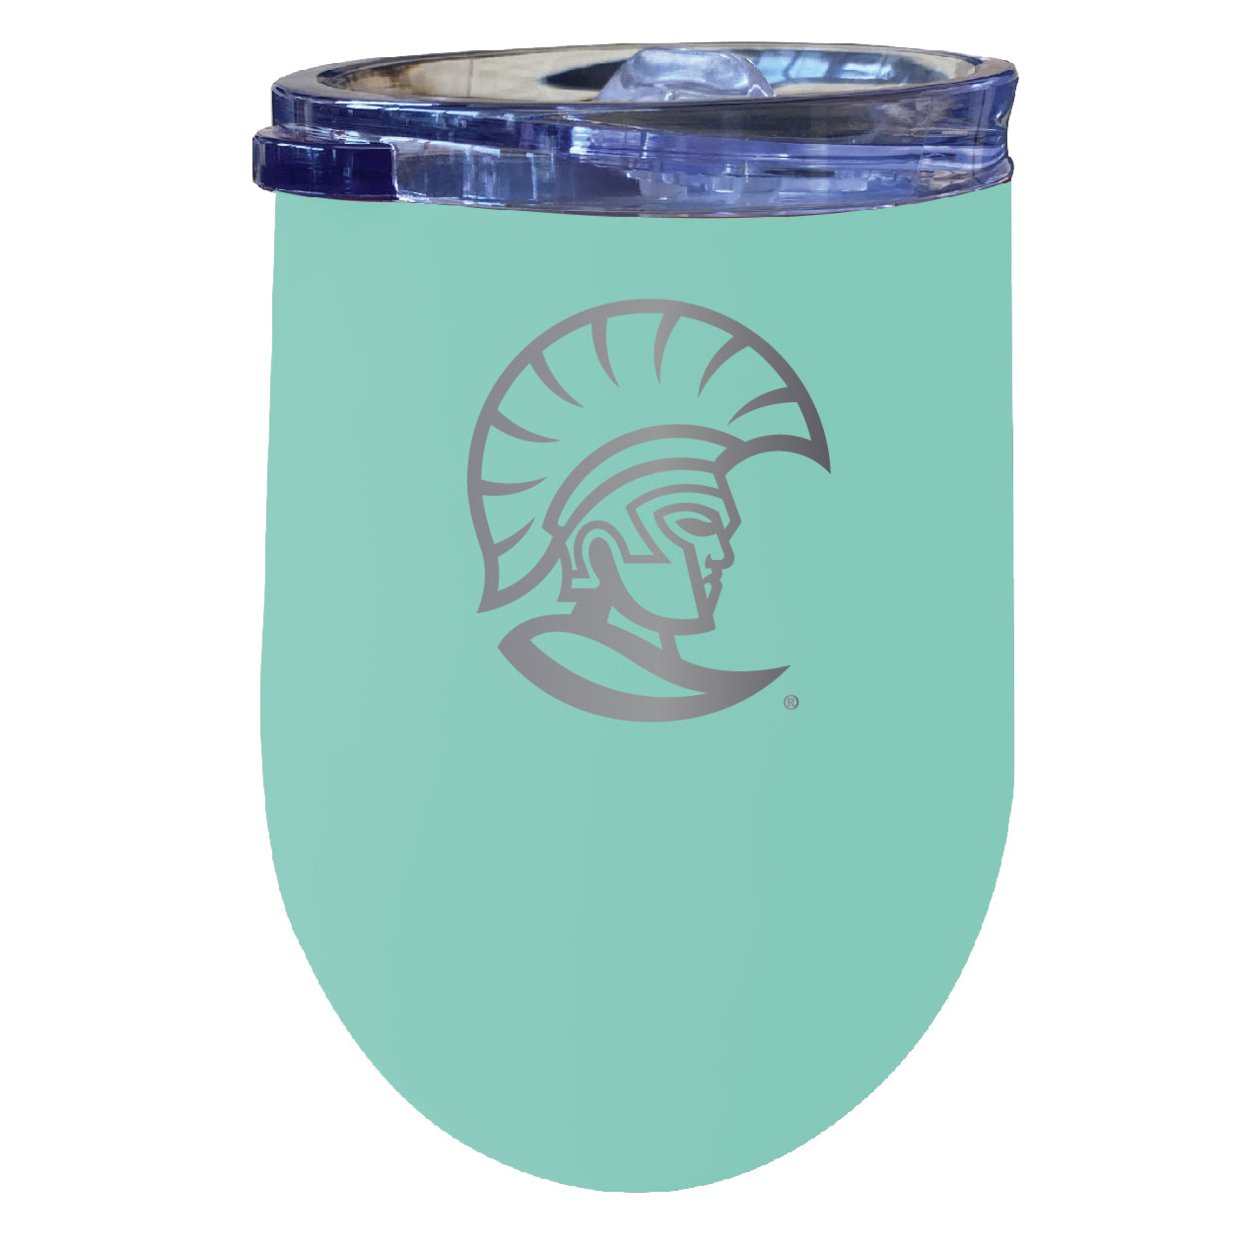 University Of Tampa Spartans 12 Oz Etched Insulated Wine Stainless Steel Tumbler - Choose Your Color - Coral